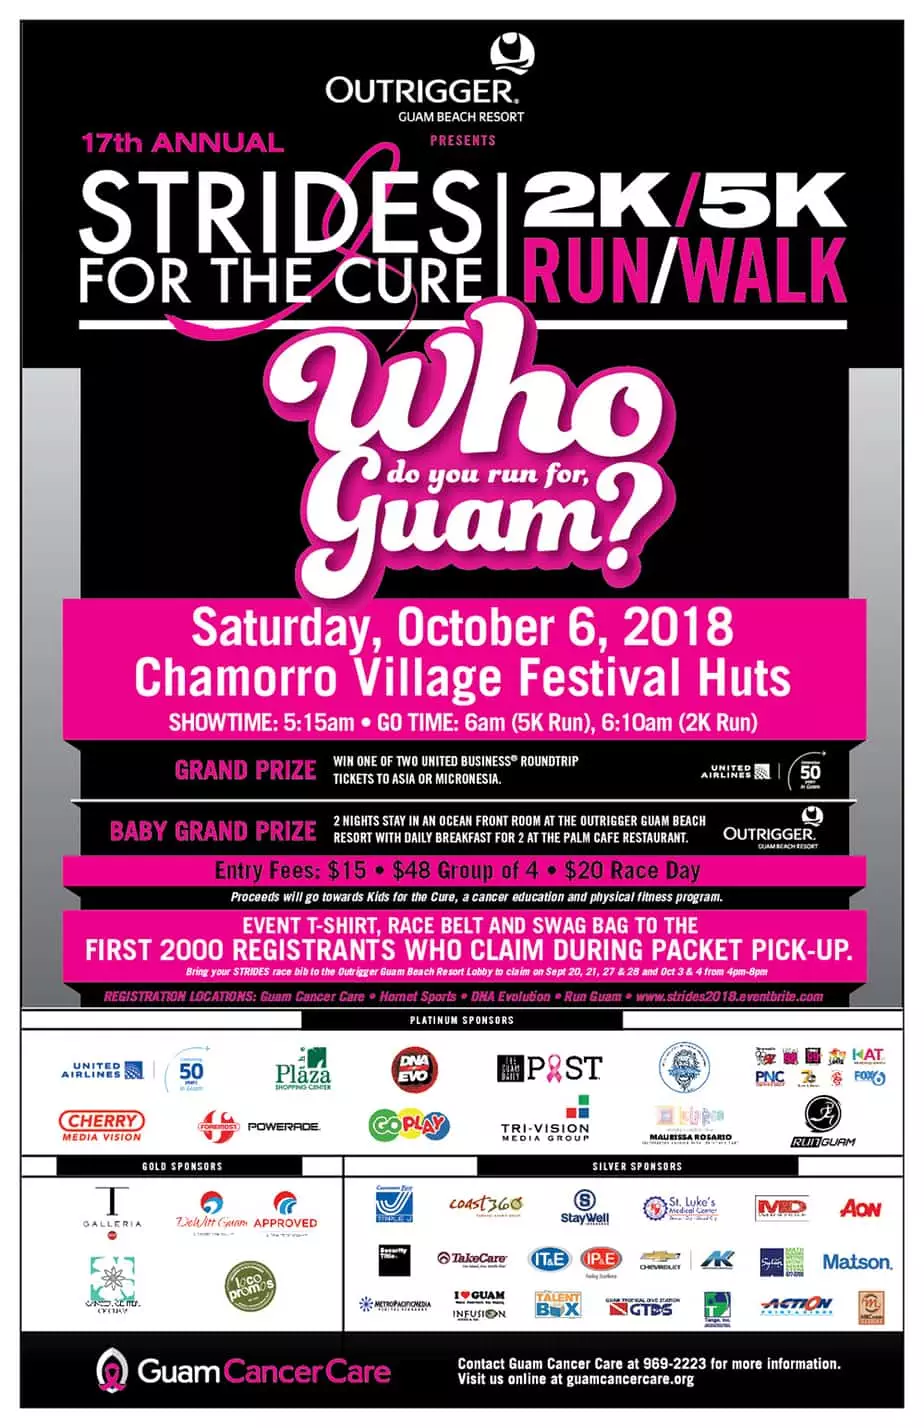 17th ANNUAL STRIDES FOR THE CURE 2K/5K RUN OCTOBER 6